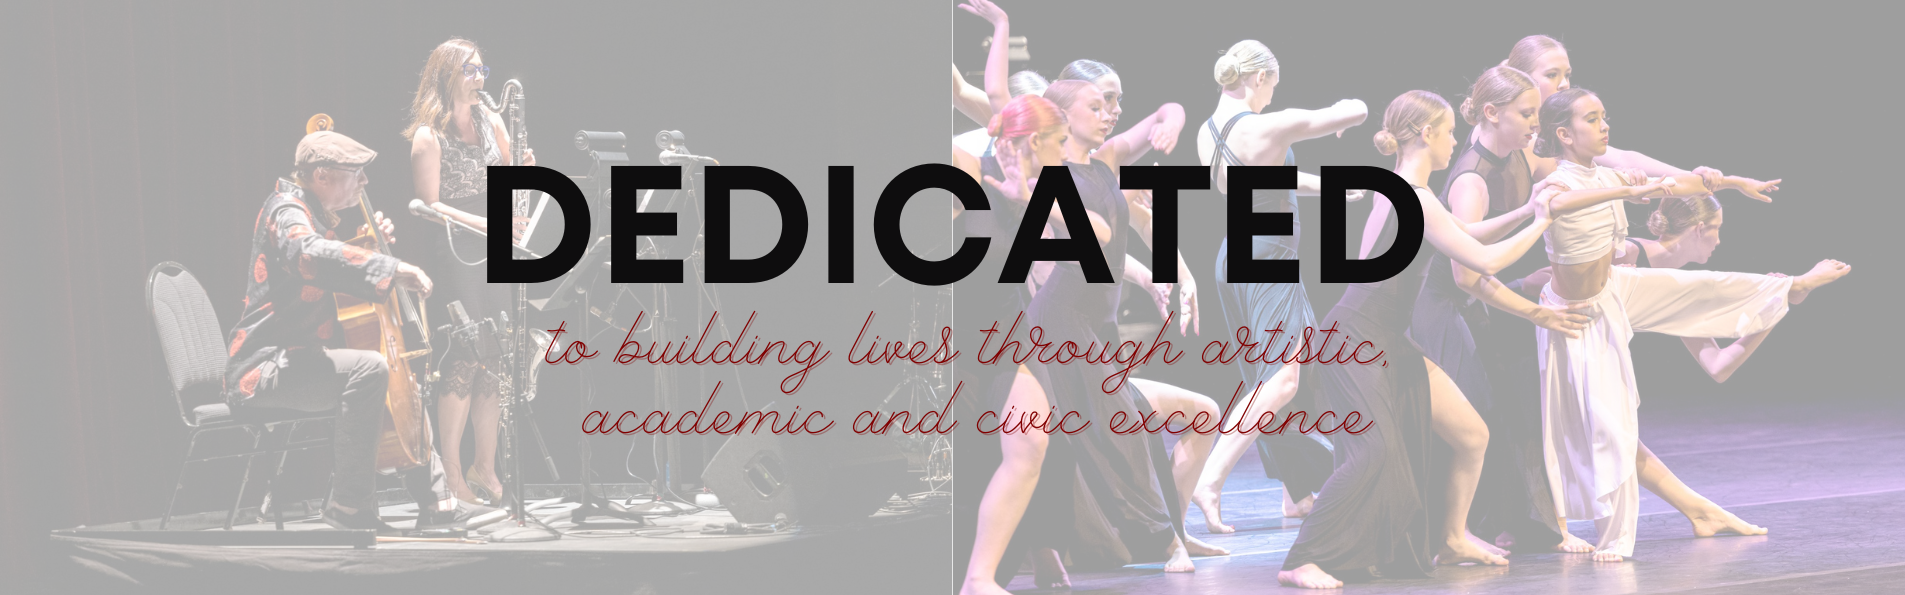 dedicated to building lives through artistic, academic and civic excellence